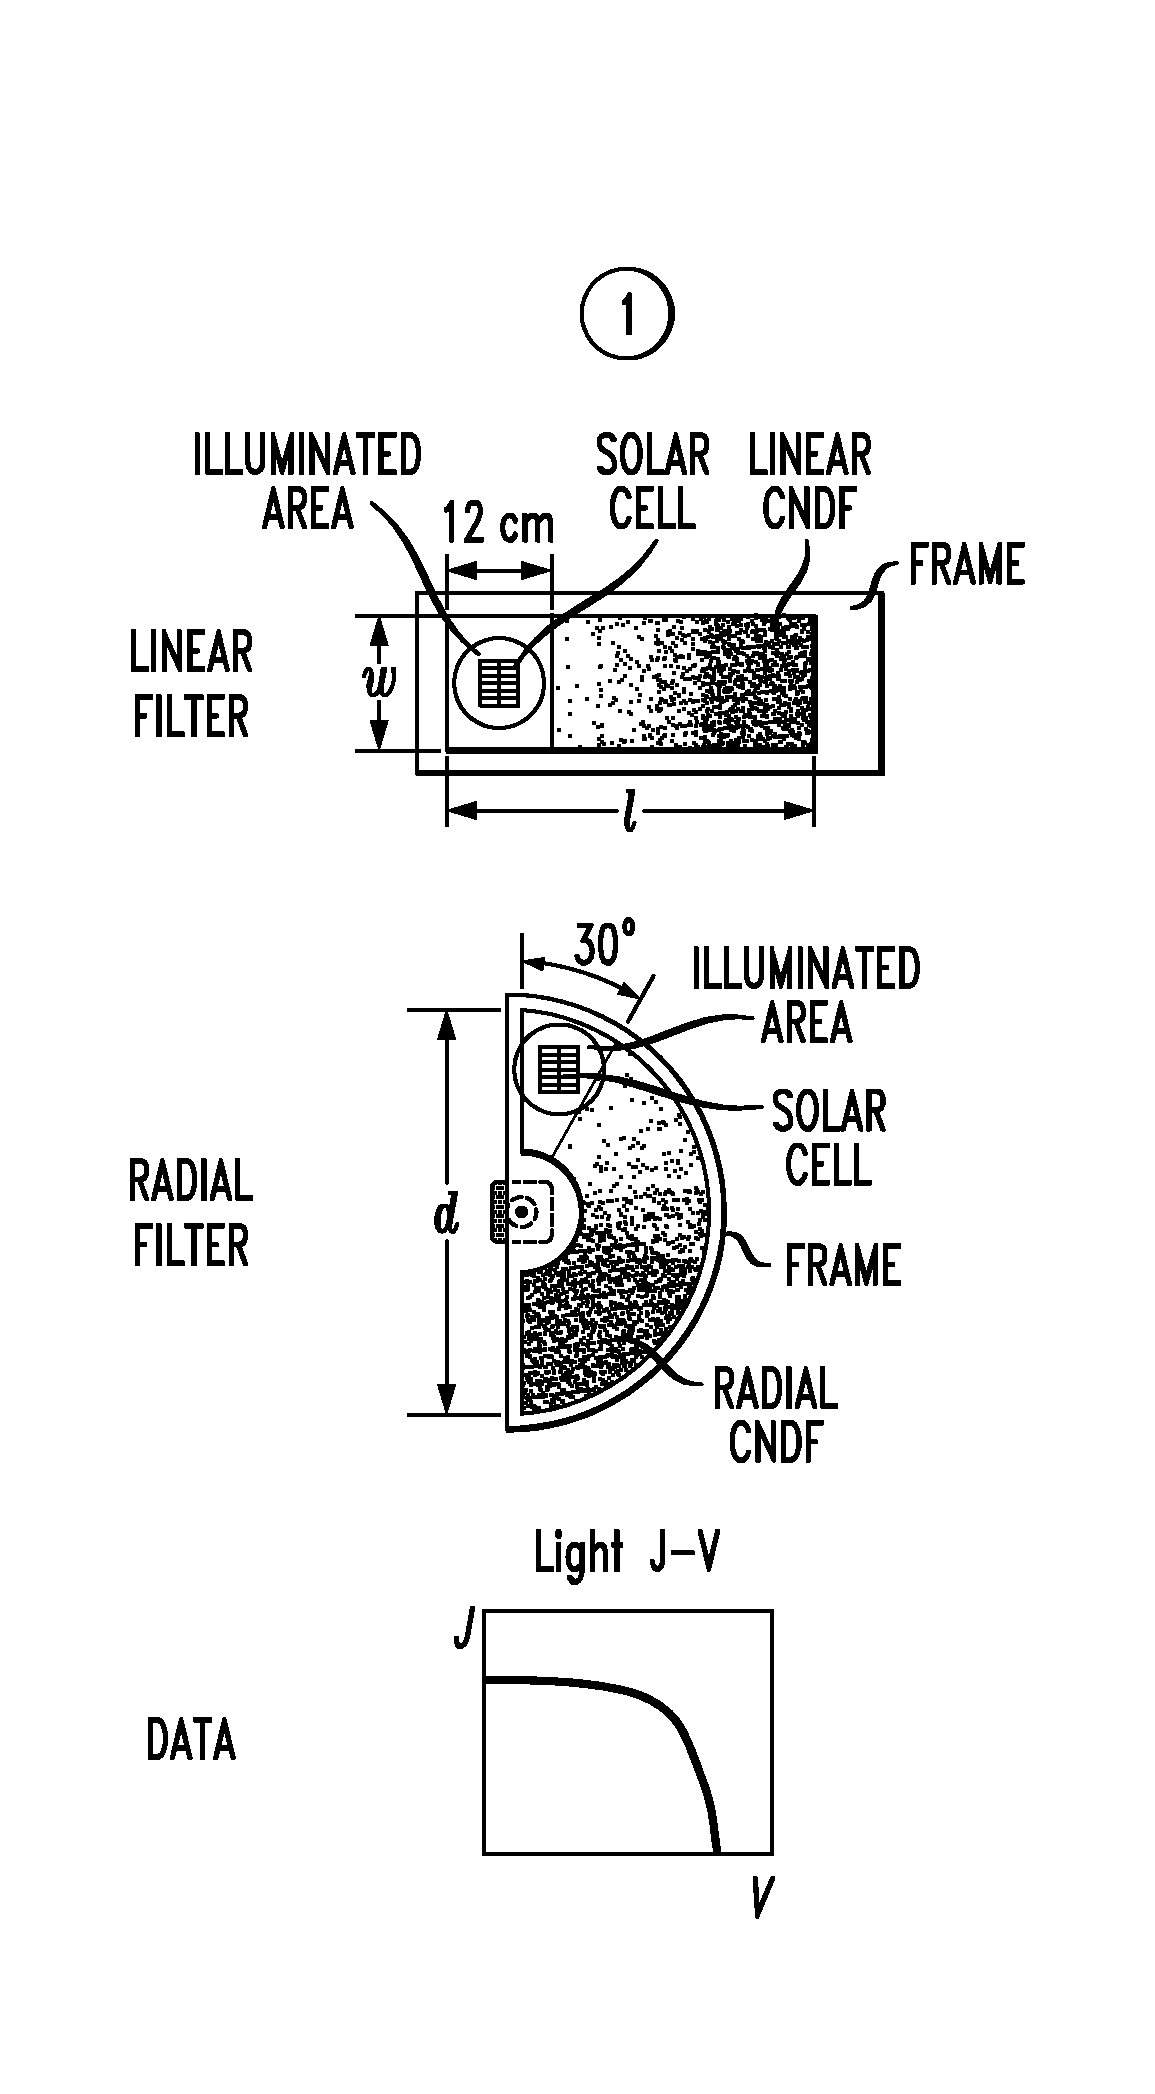 Solar cell characterization system with an automated continuous neutral density filter